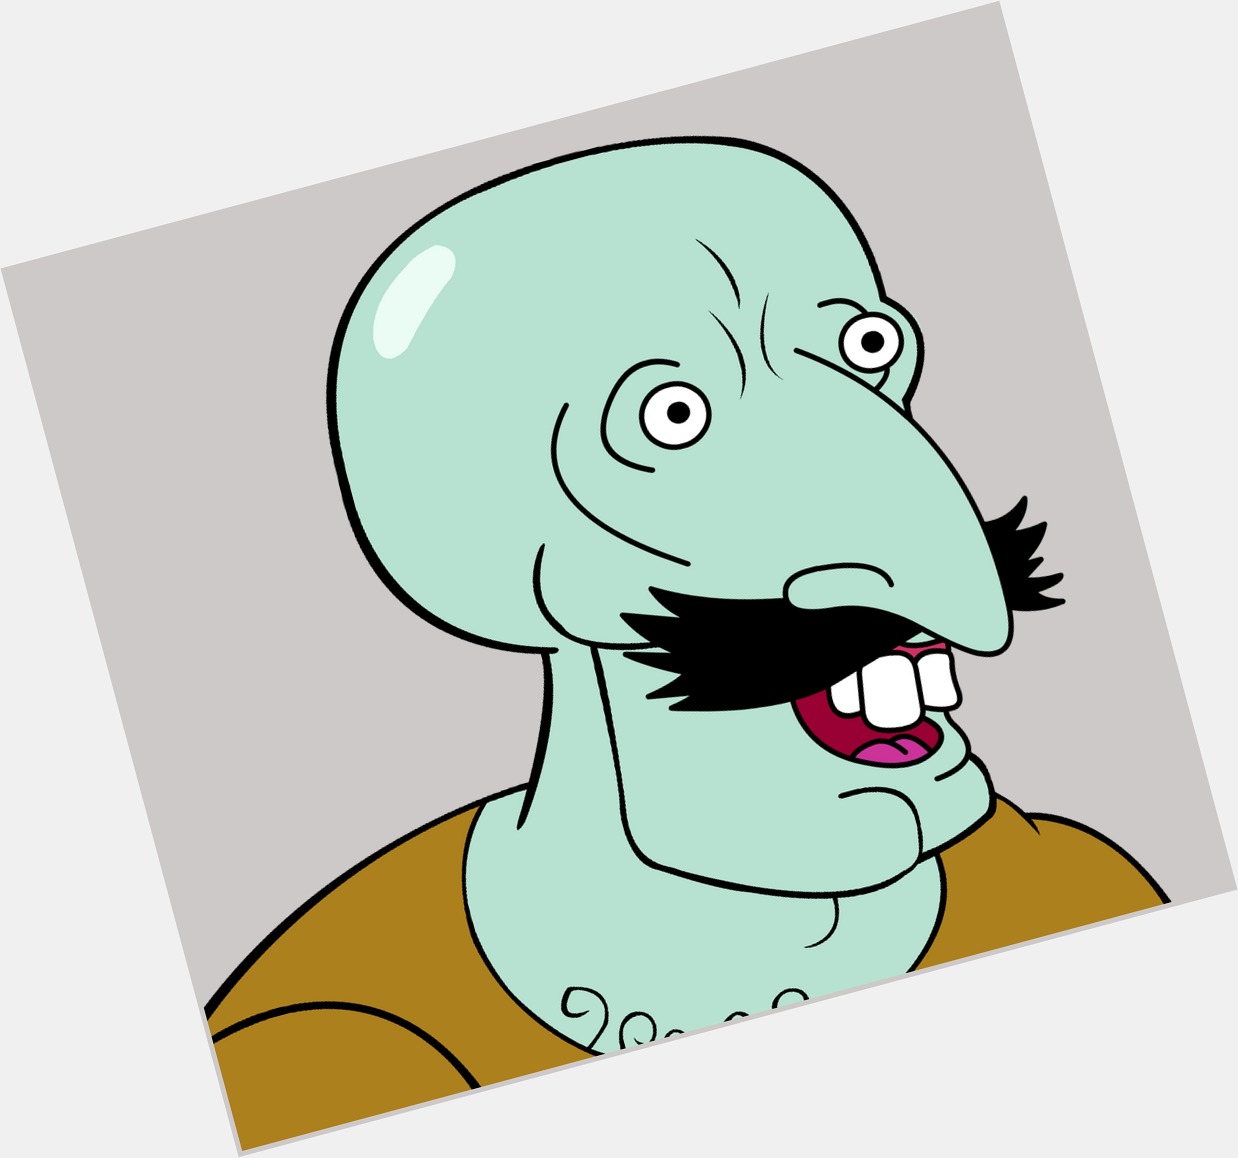 <a href="/hot-men/squidward-tentacles/is-he-squid-or-octopus-what-joshjepson-middle">Squidward Tentacles</a> Slim body,  bald hair & hairstyles